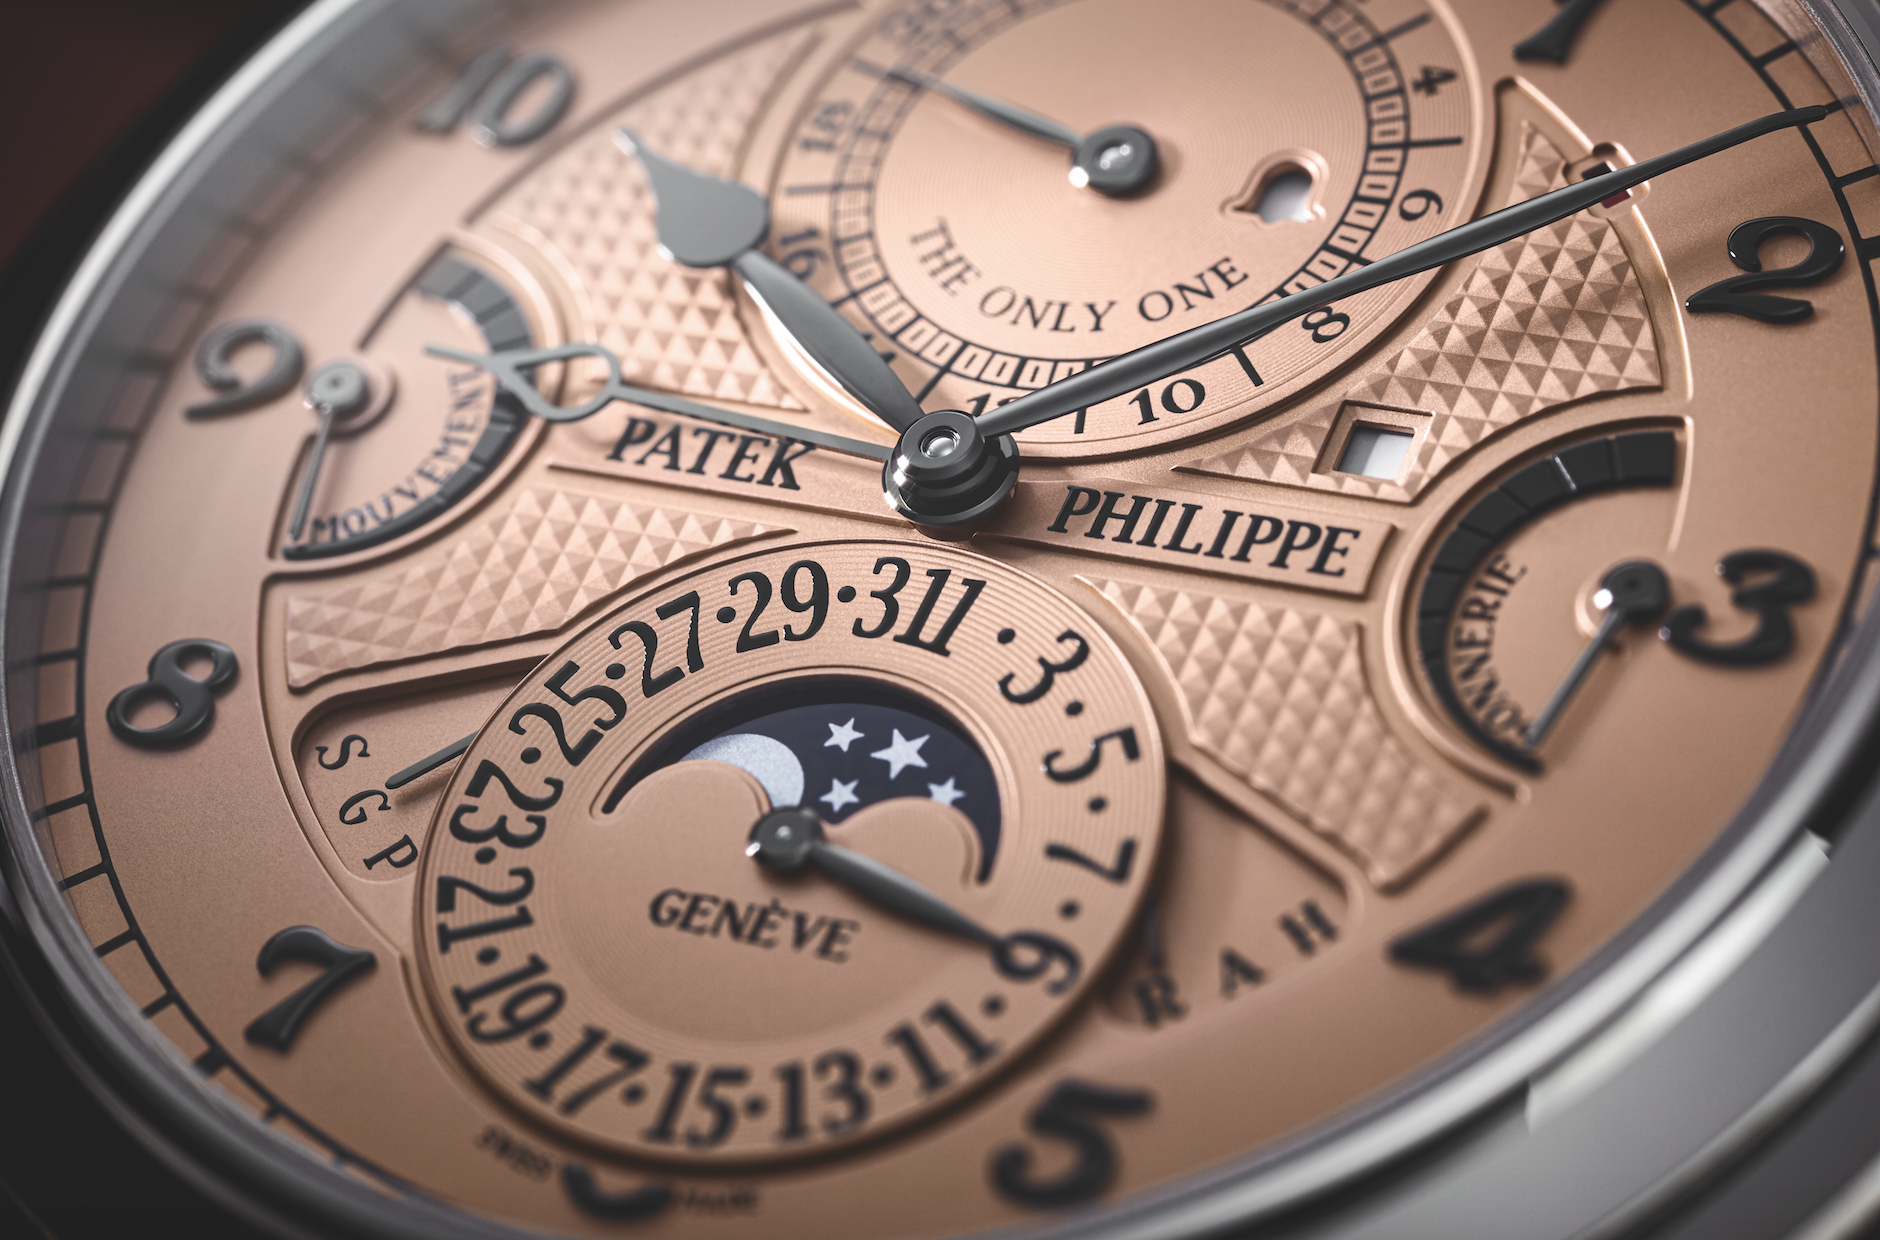 A Patek Philippe 'Grandmaster' Watch Just Sold for an Astonishing